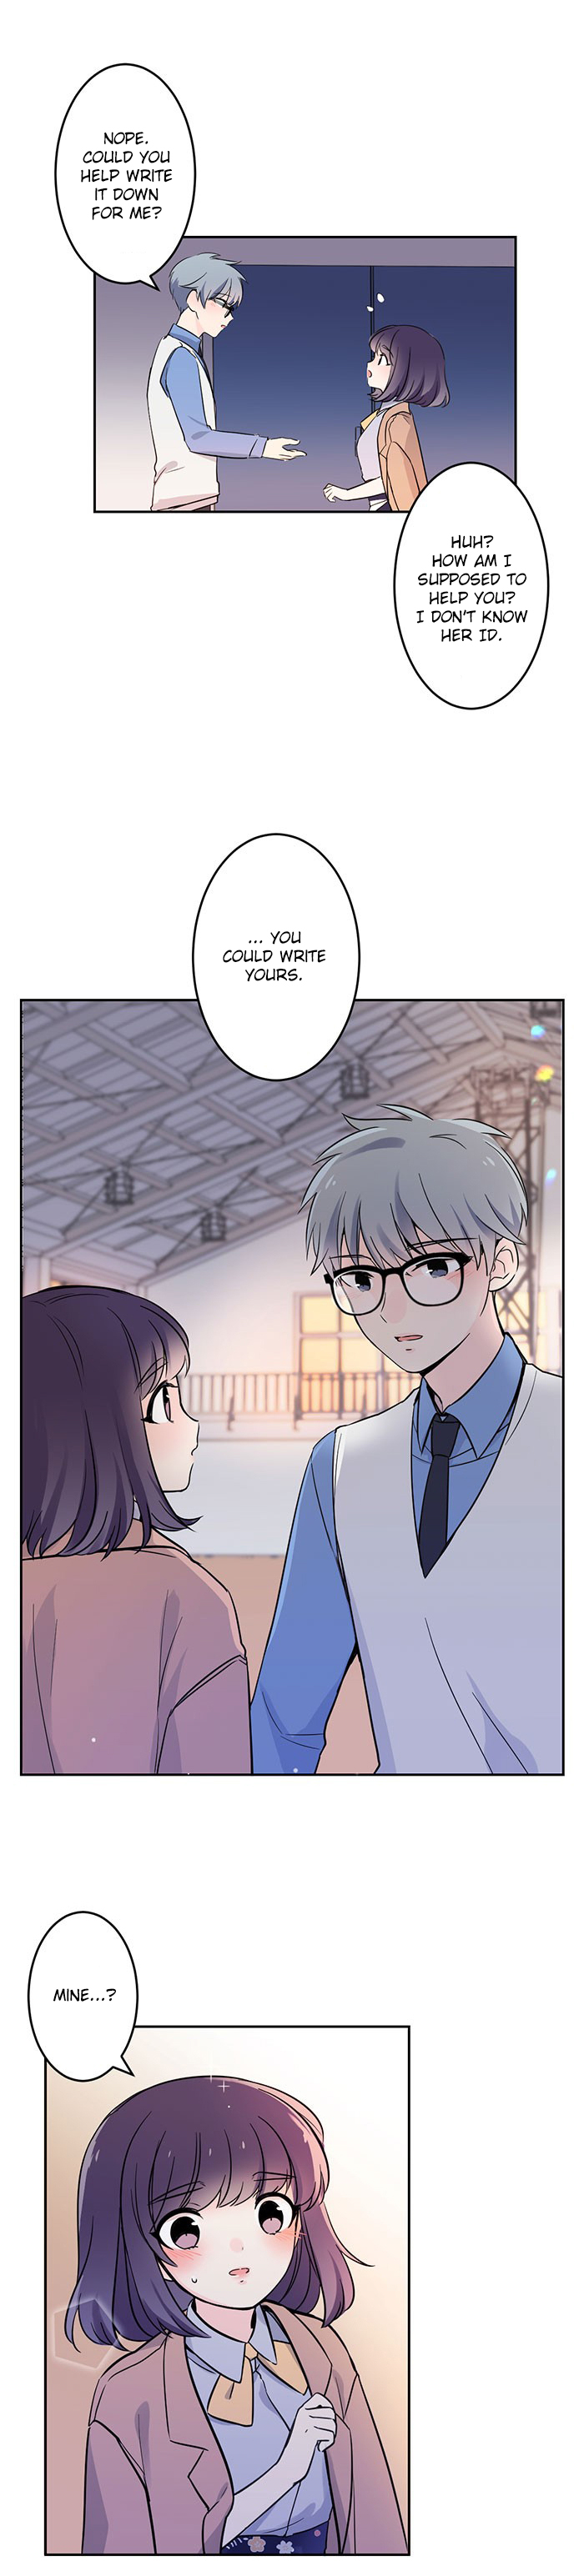 Reversed Love Route Ch. 8